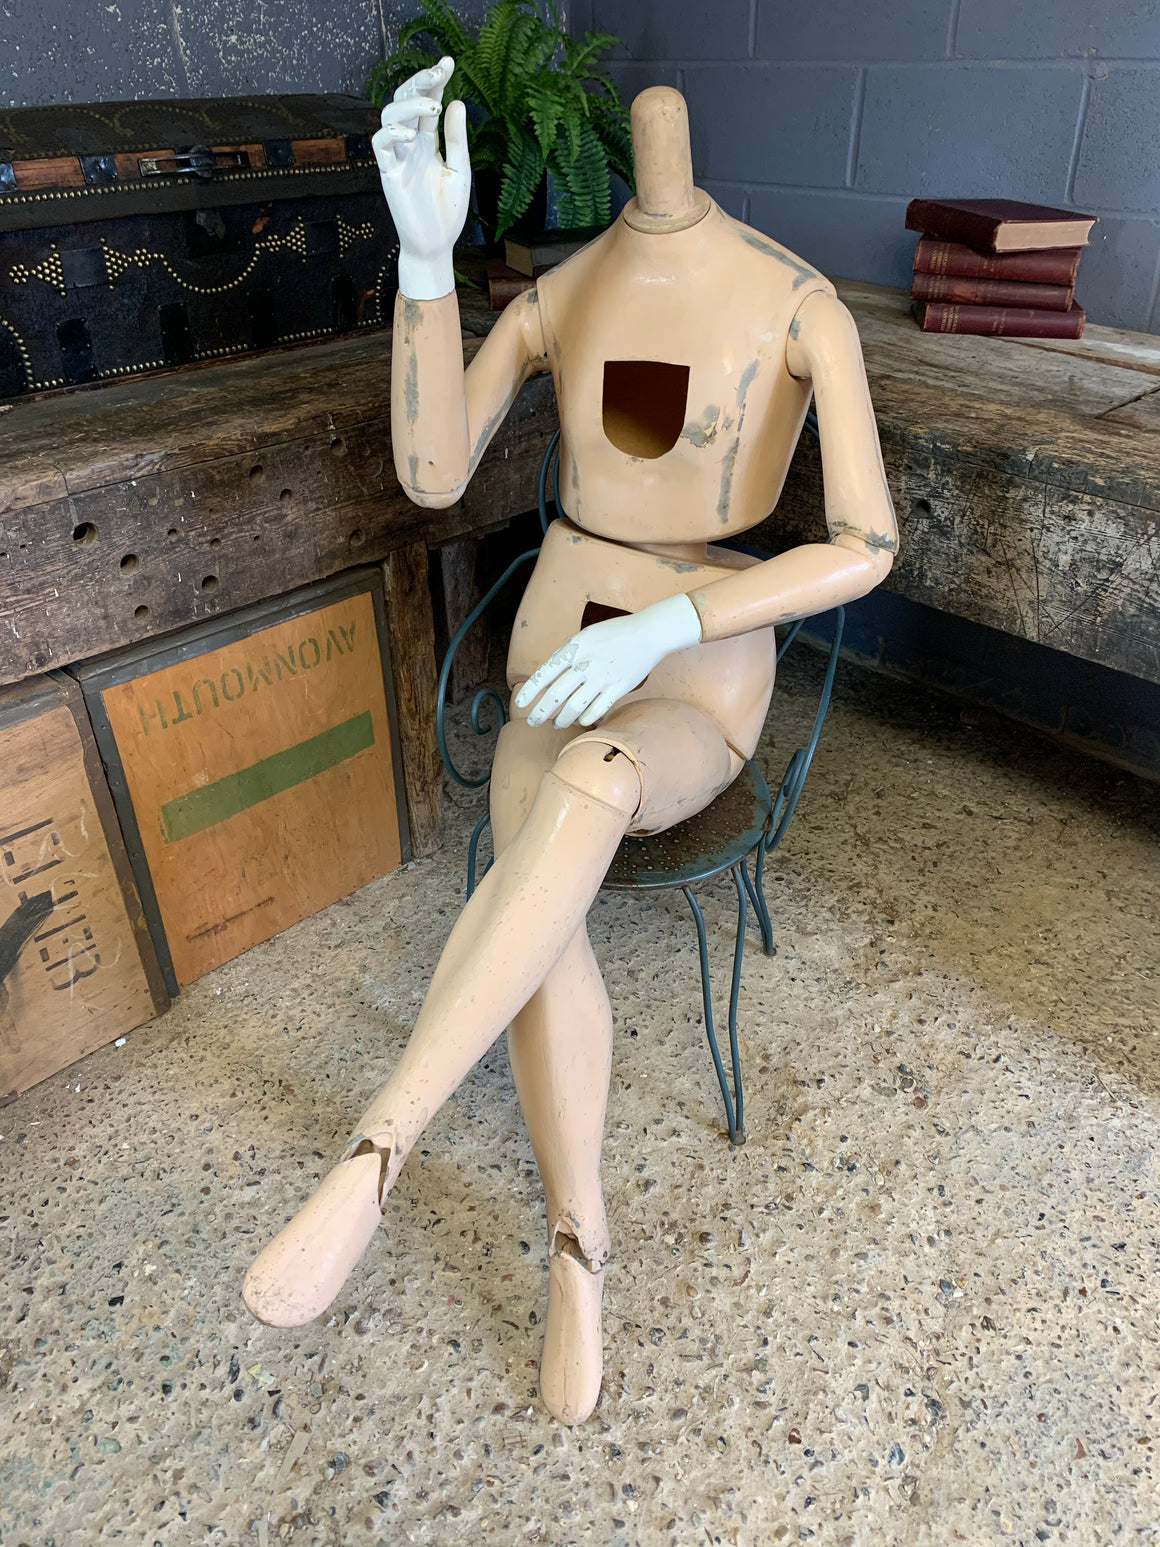 A vintage articulated full form mannequin or lay figure